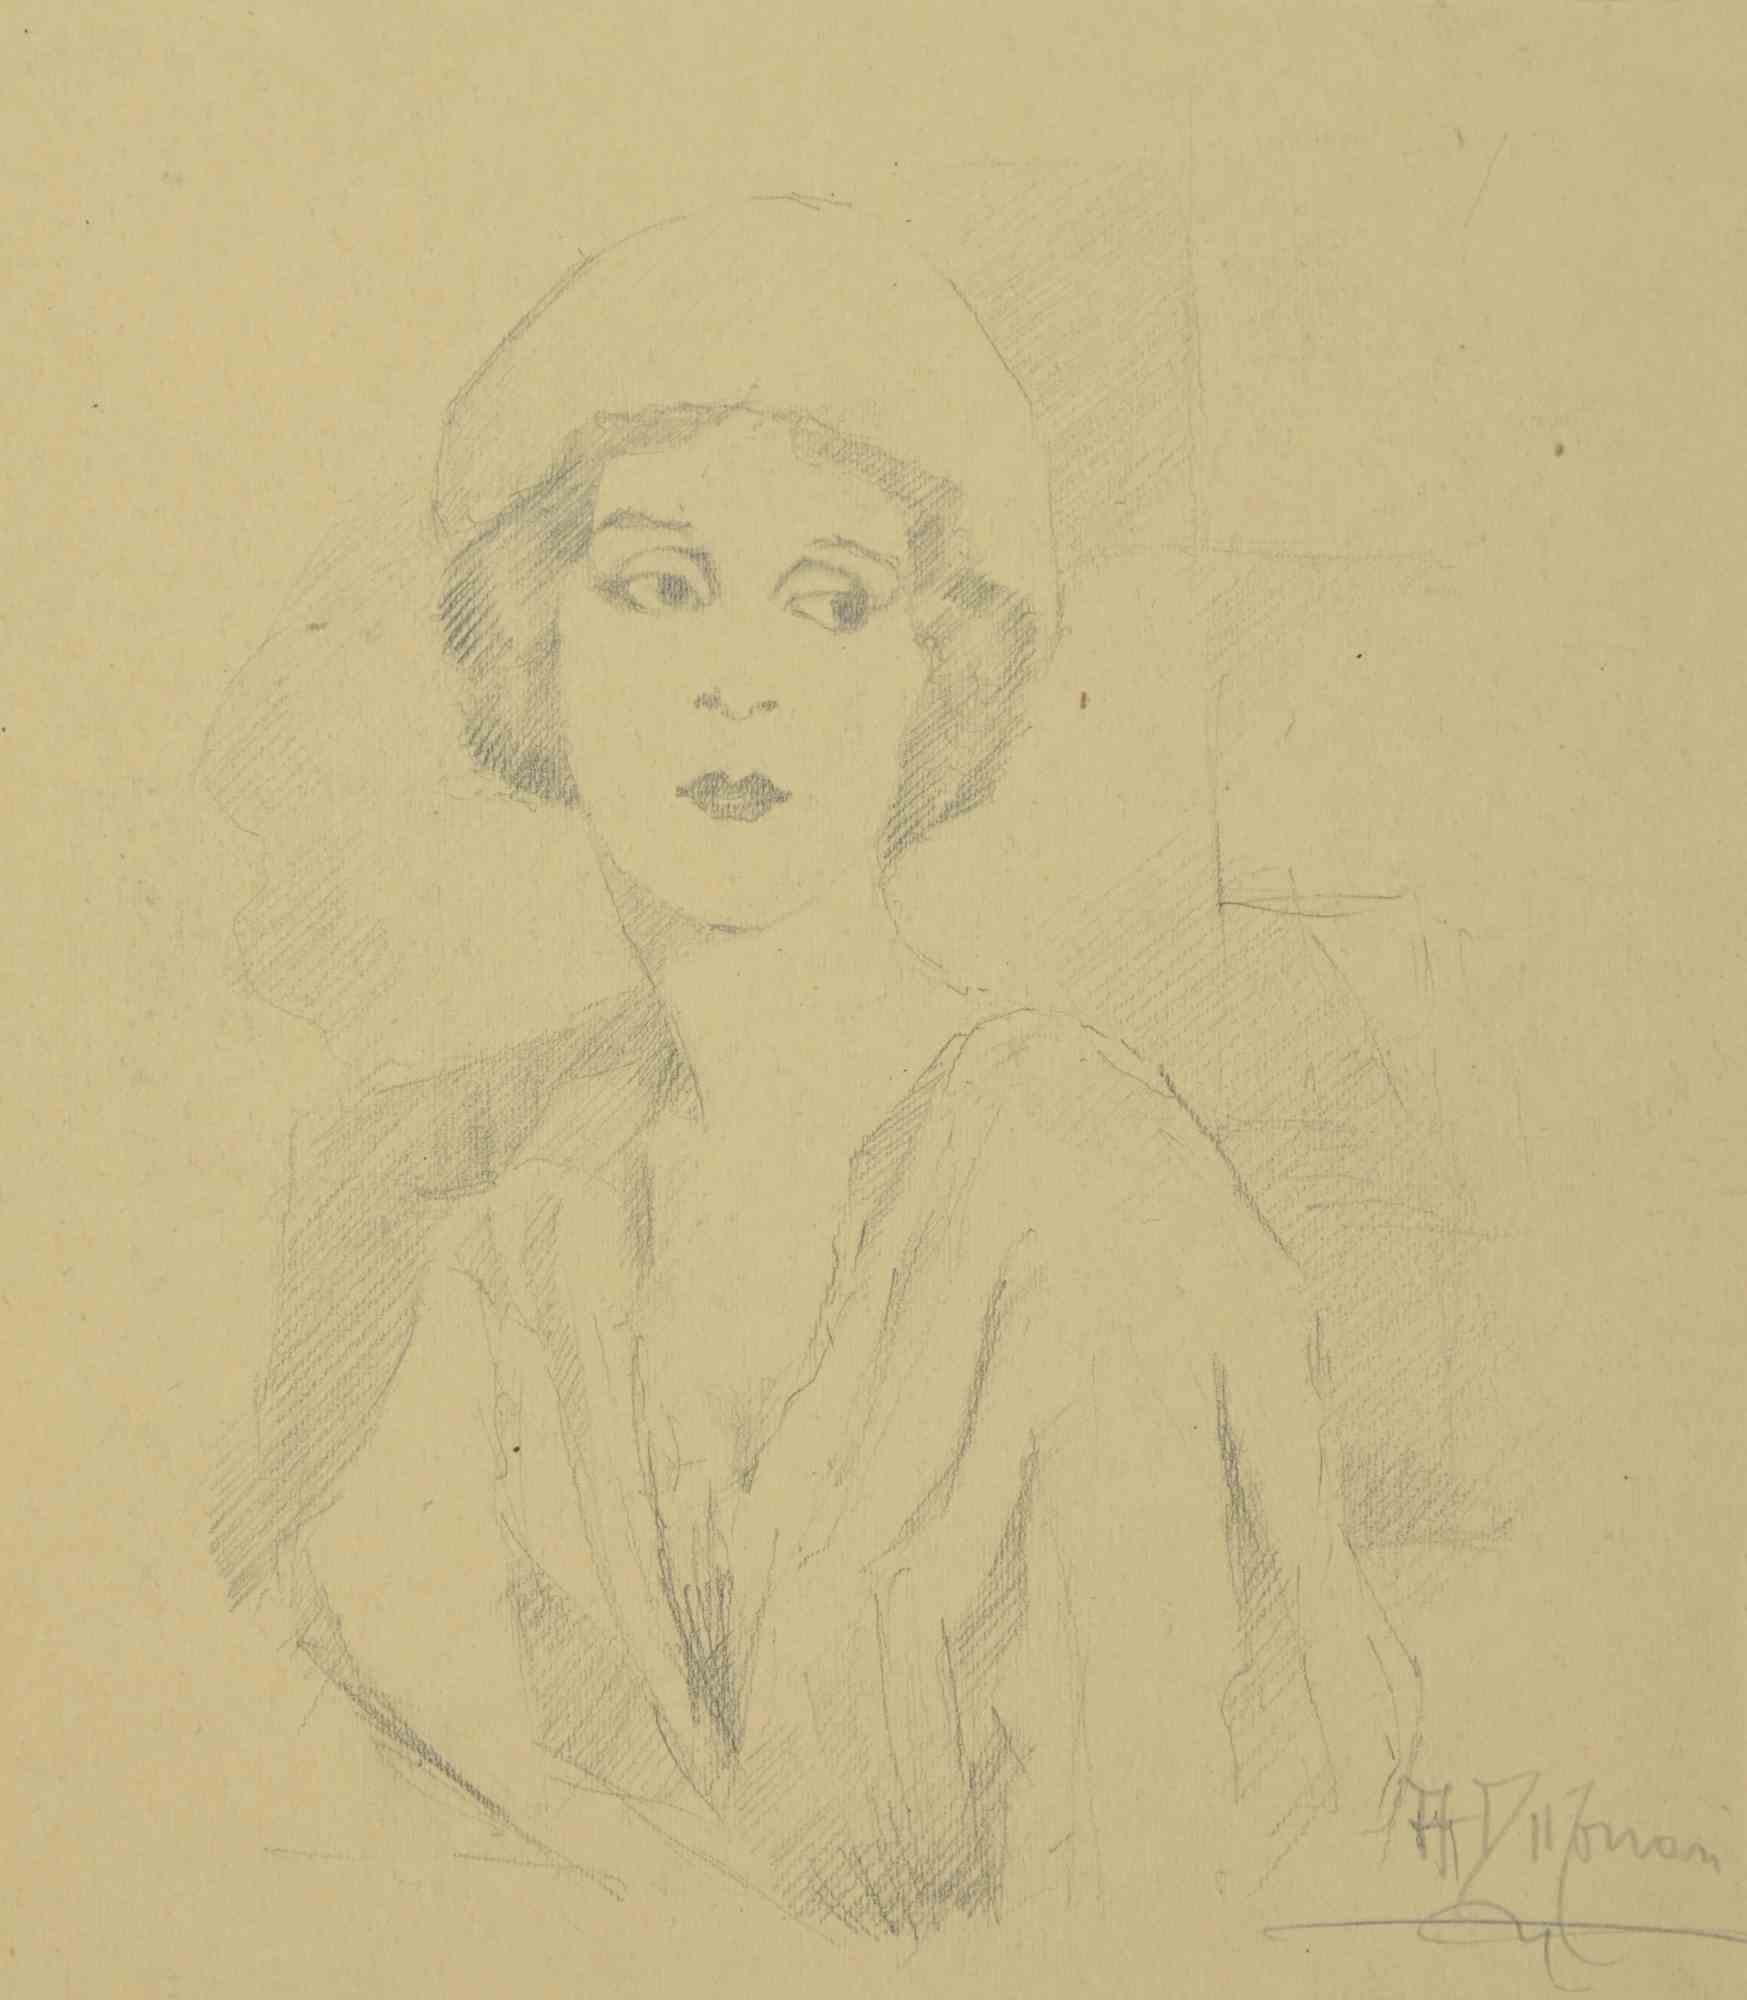 Portrait is a Drawing in pencil realized by  Augusto Monari in the Early-20th Century.

Good conditions.

The artwork is depicted through confident strokes in a well-balanced composition.